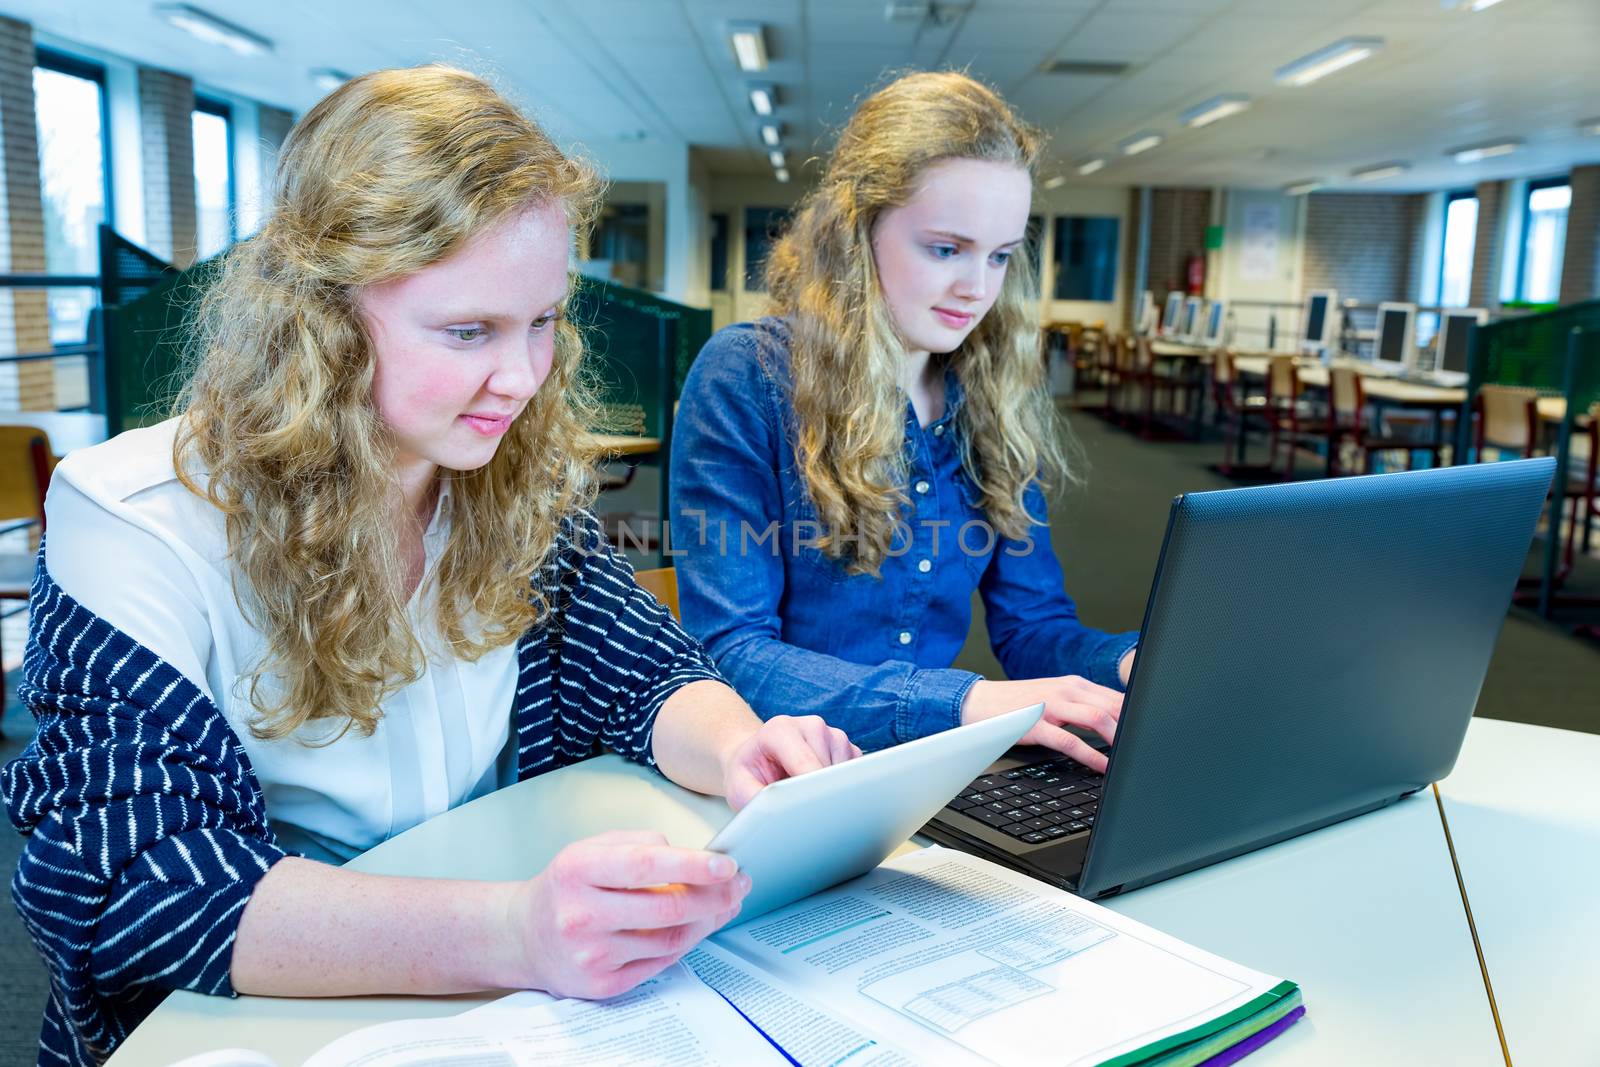 Two dutch girls working on computer and tablet in computer class by BenSchonewille